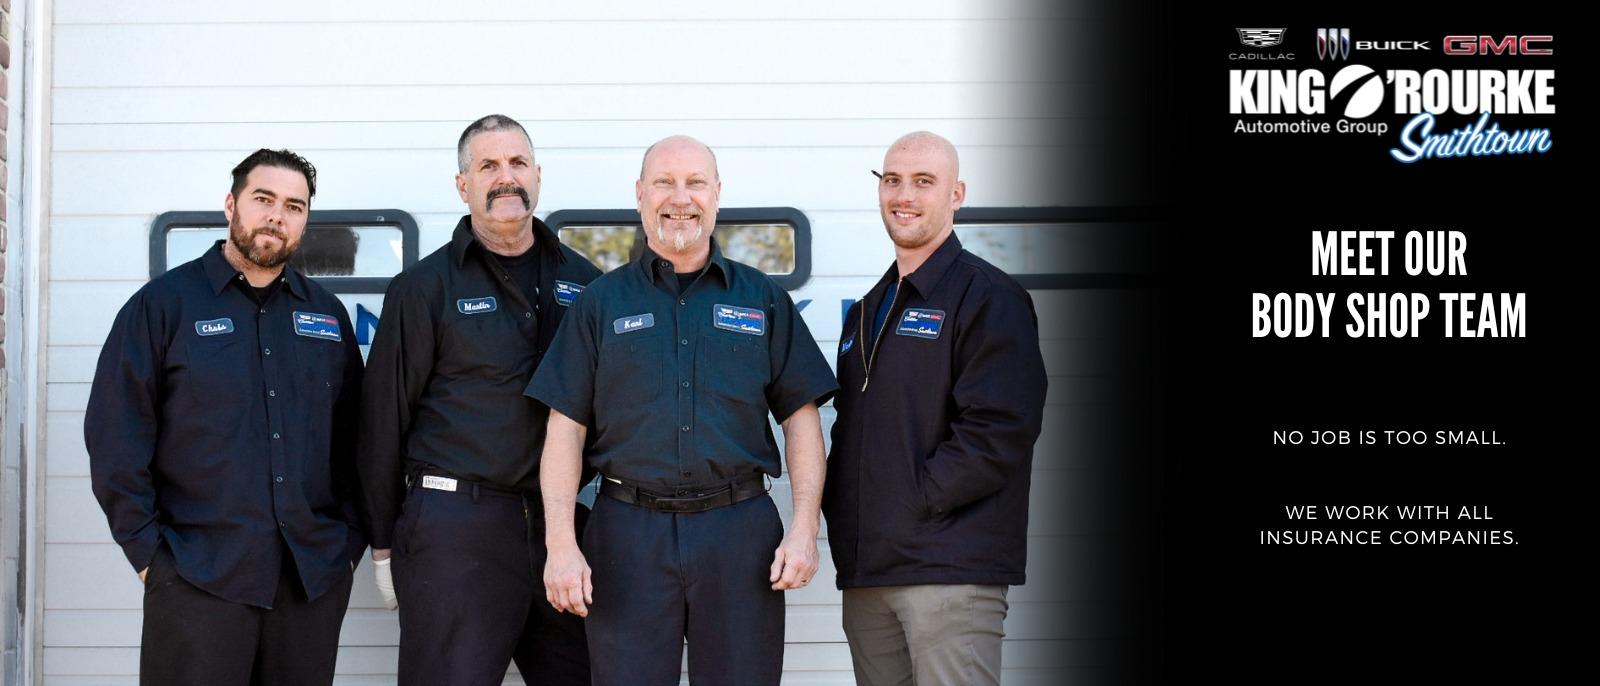 Meet the King O'Rourke Body Shop Team in Smithtown, NY